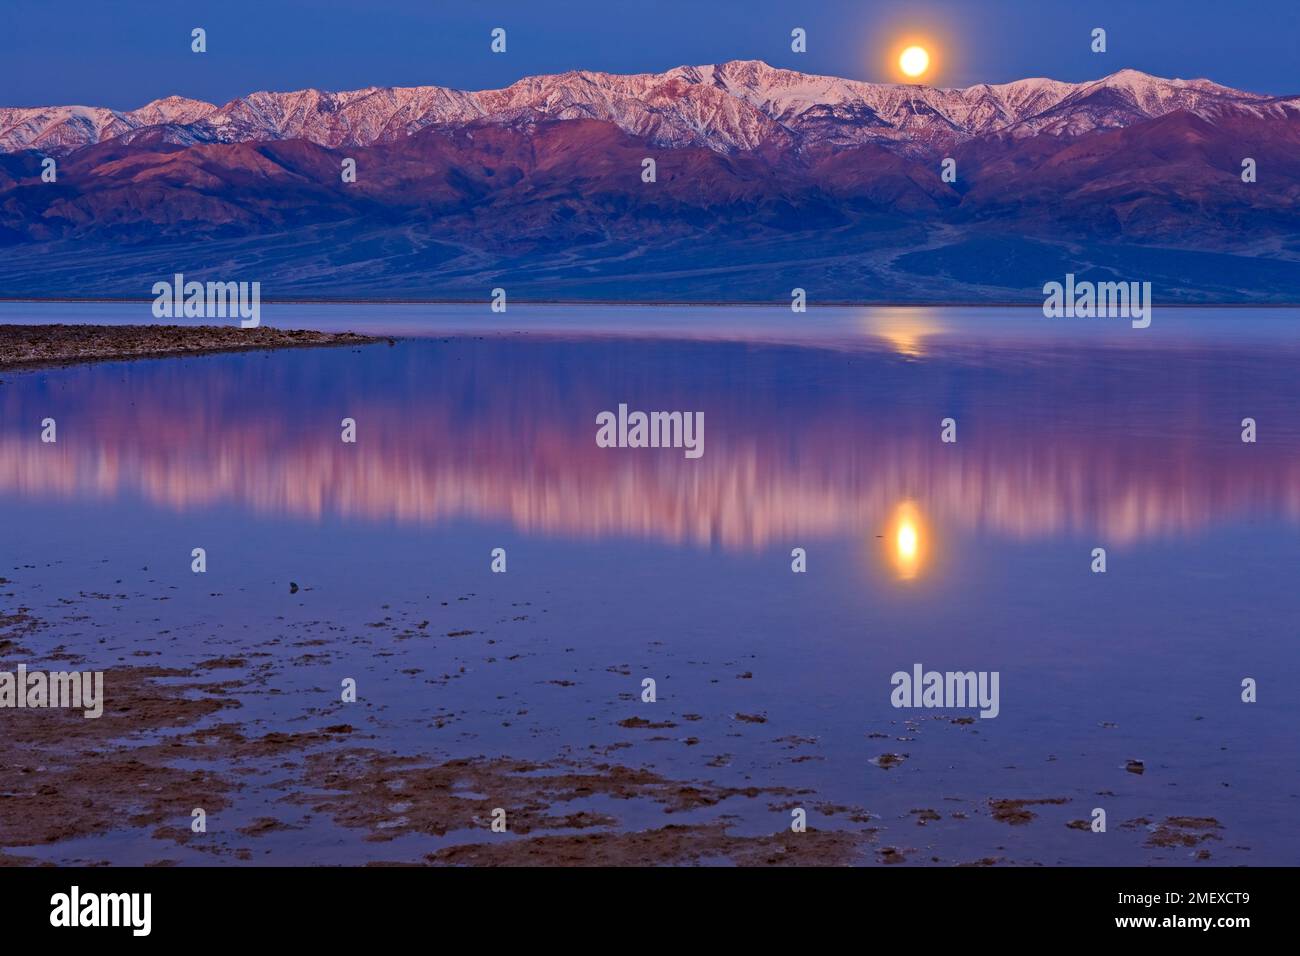 Reflections in Badwater Basin lake, Moonrise over Panamint Mountains and Badwater Basin, Death Valley National Park, California, USA Stock Photo